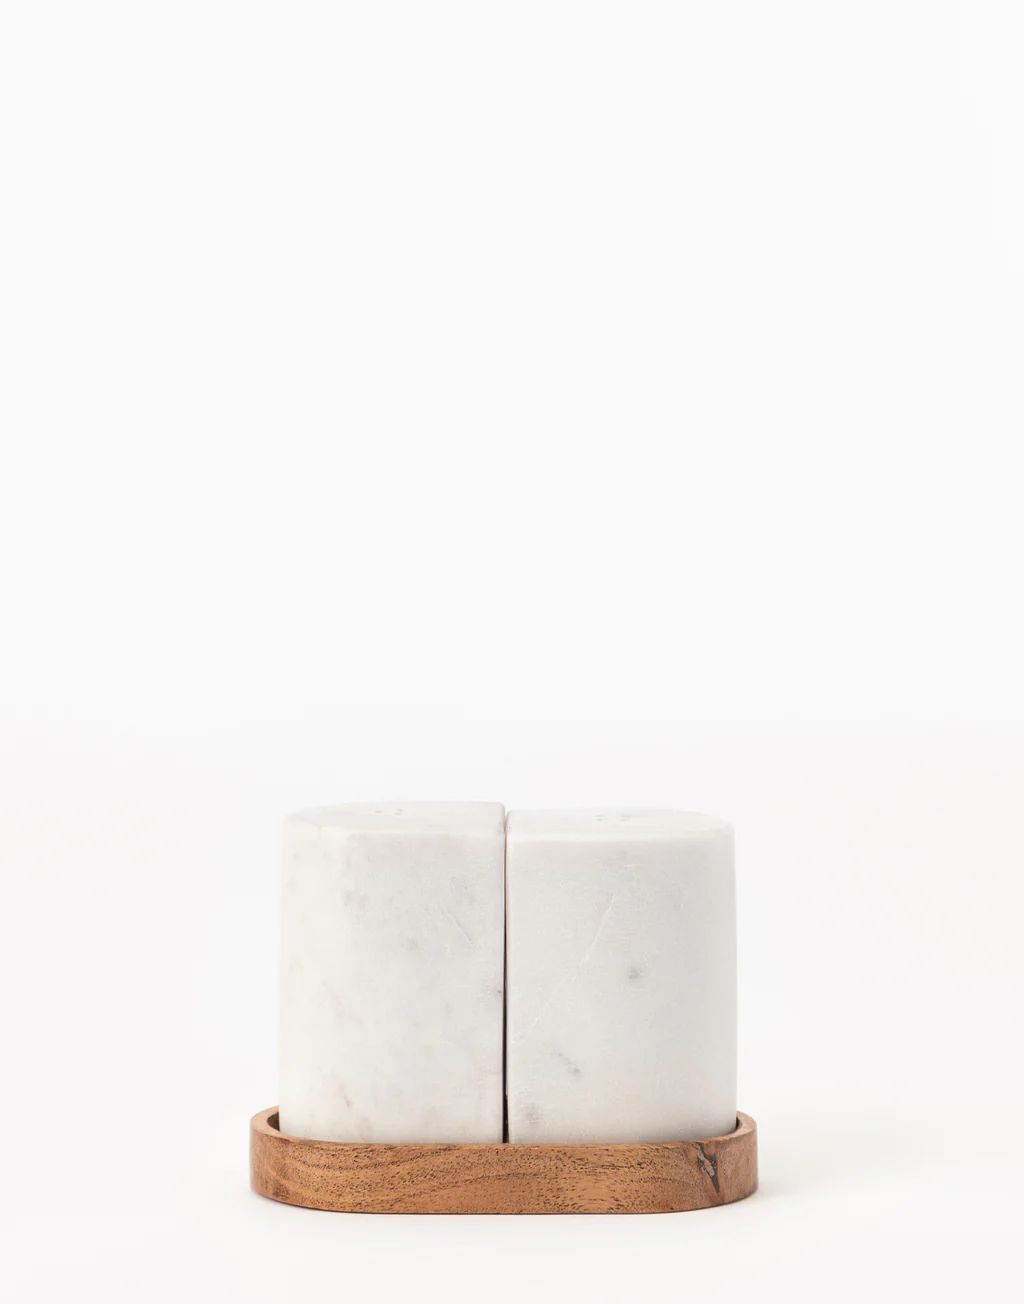 Marble Salt & Pepper Shakers with Wood Tray | McGee & Co.